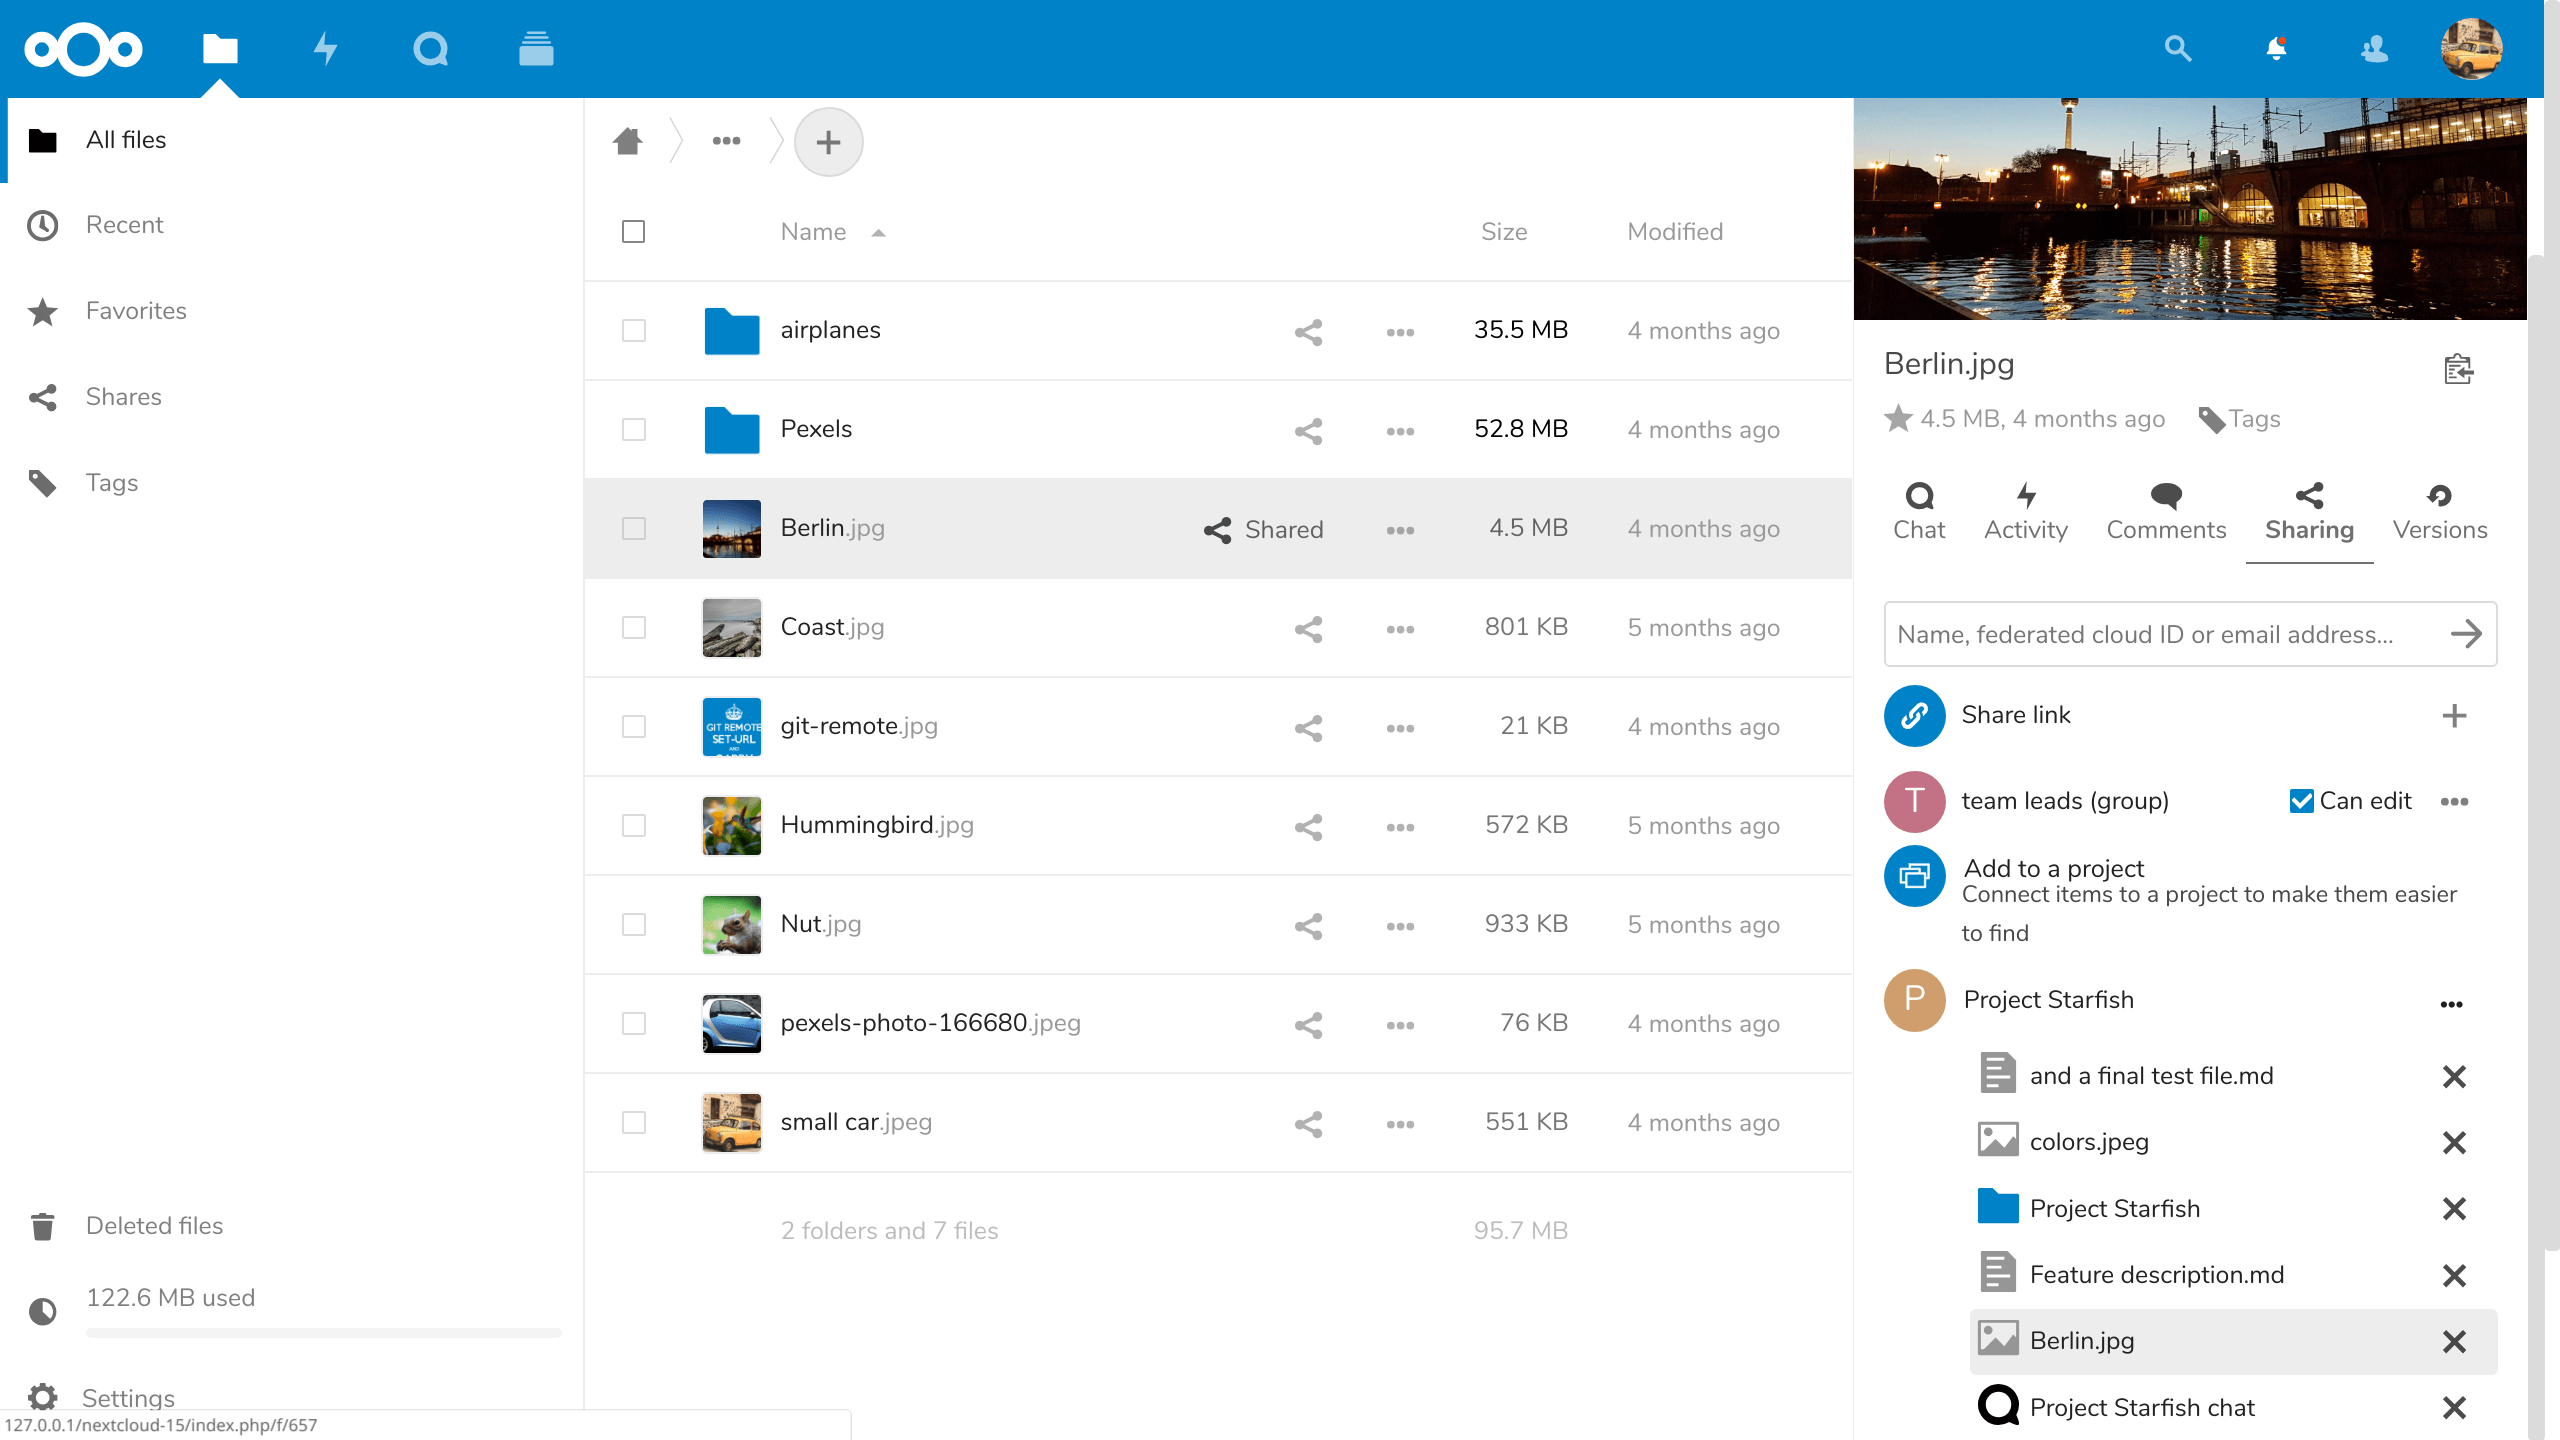 Showing items connected to a project in Files